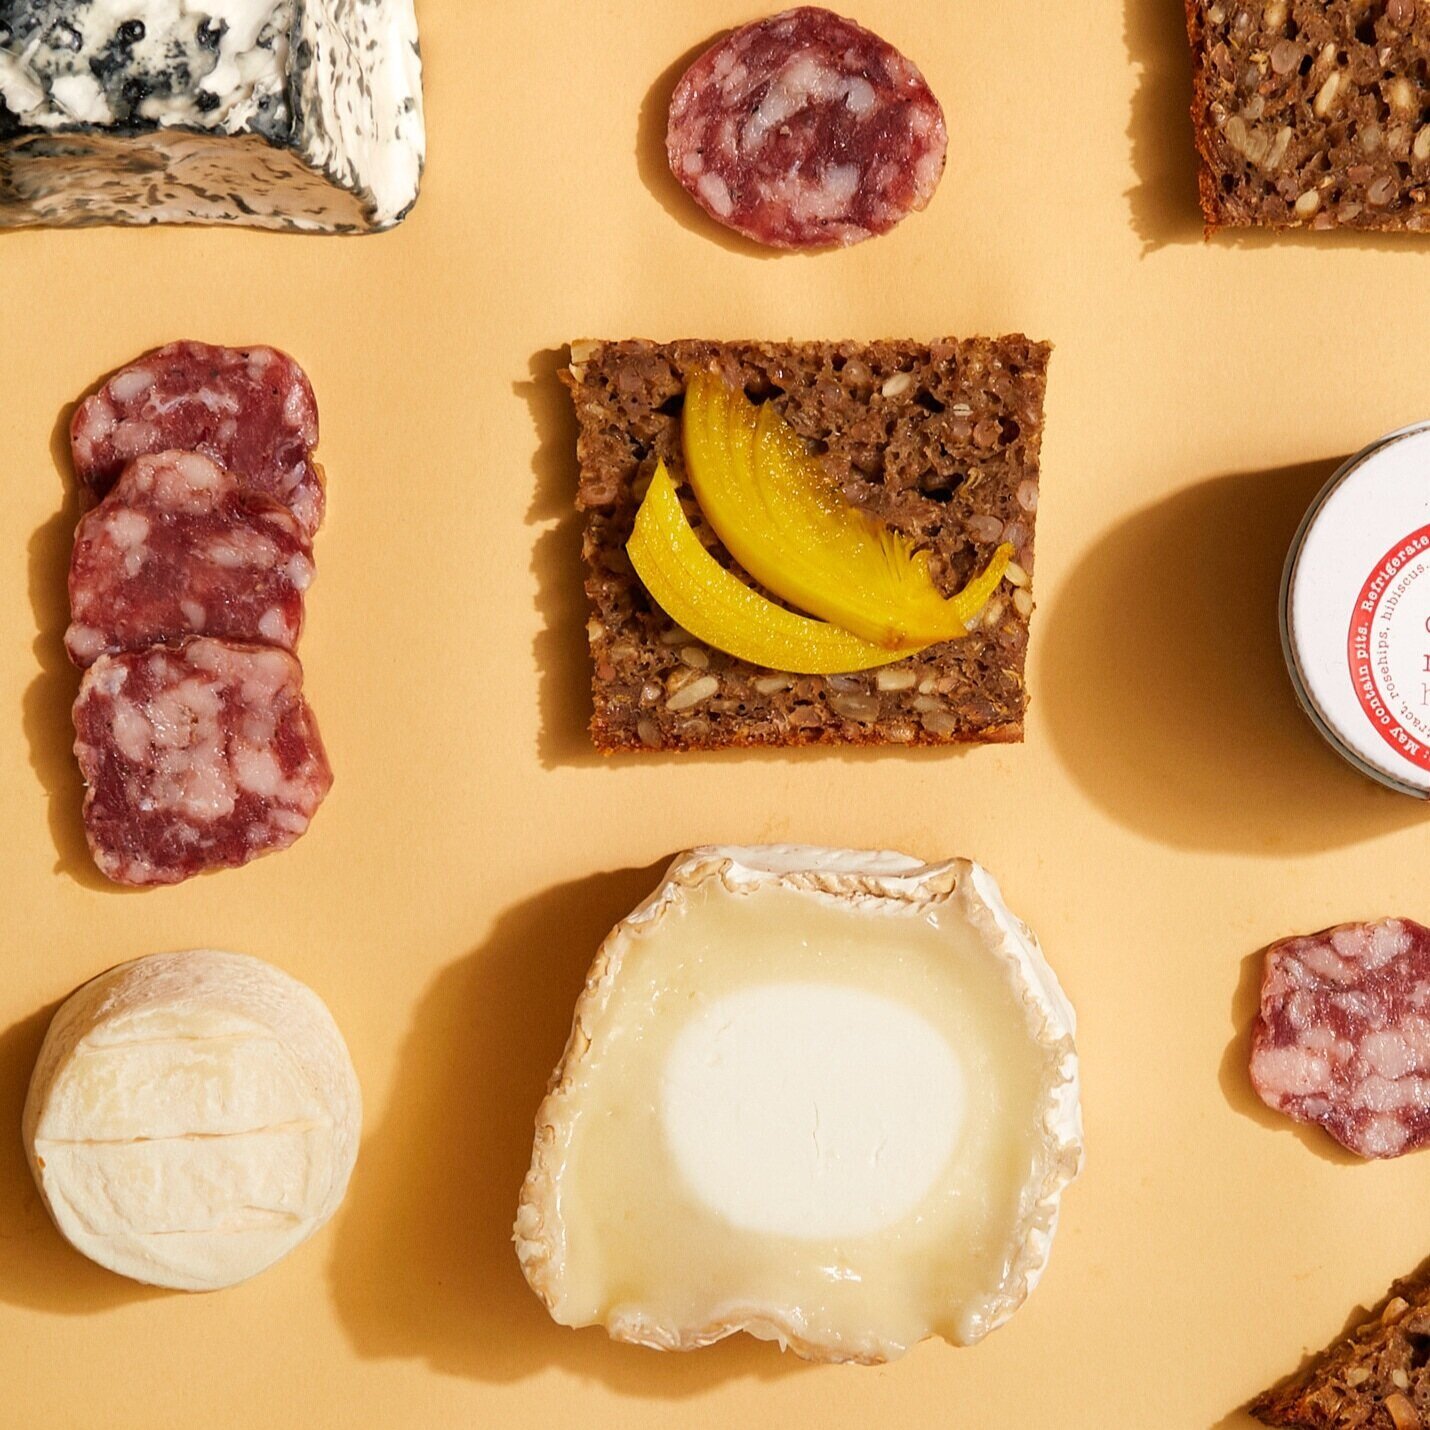 Cheeses, toast, and meets laid out on yellow paper.